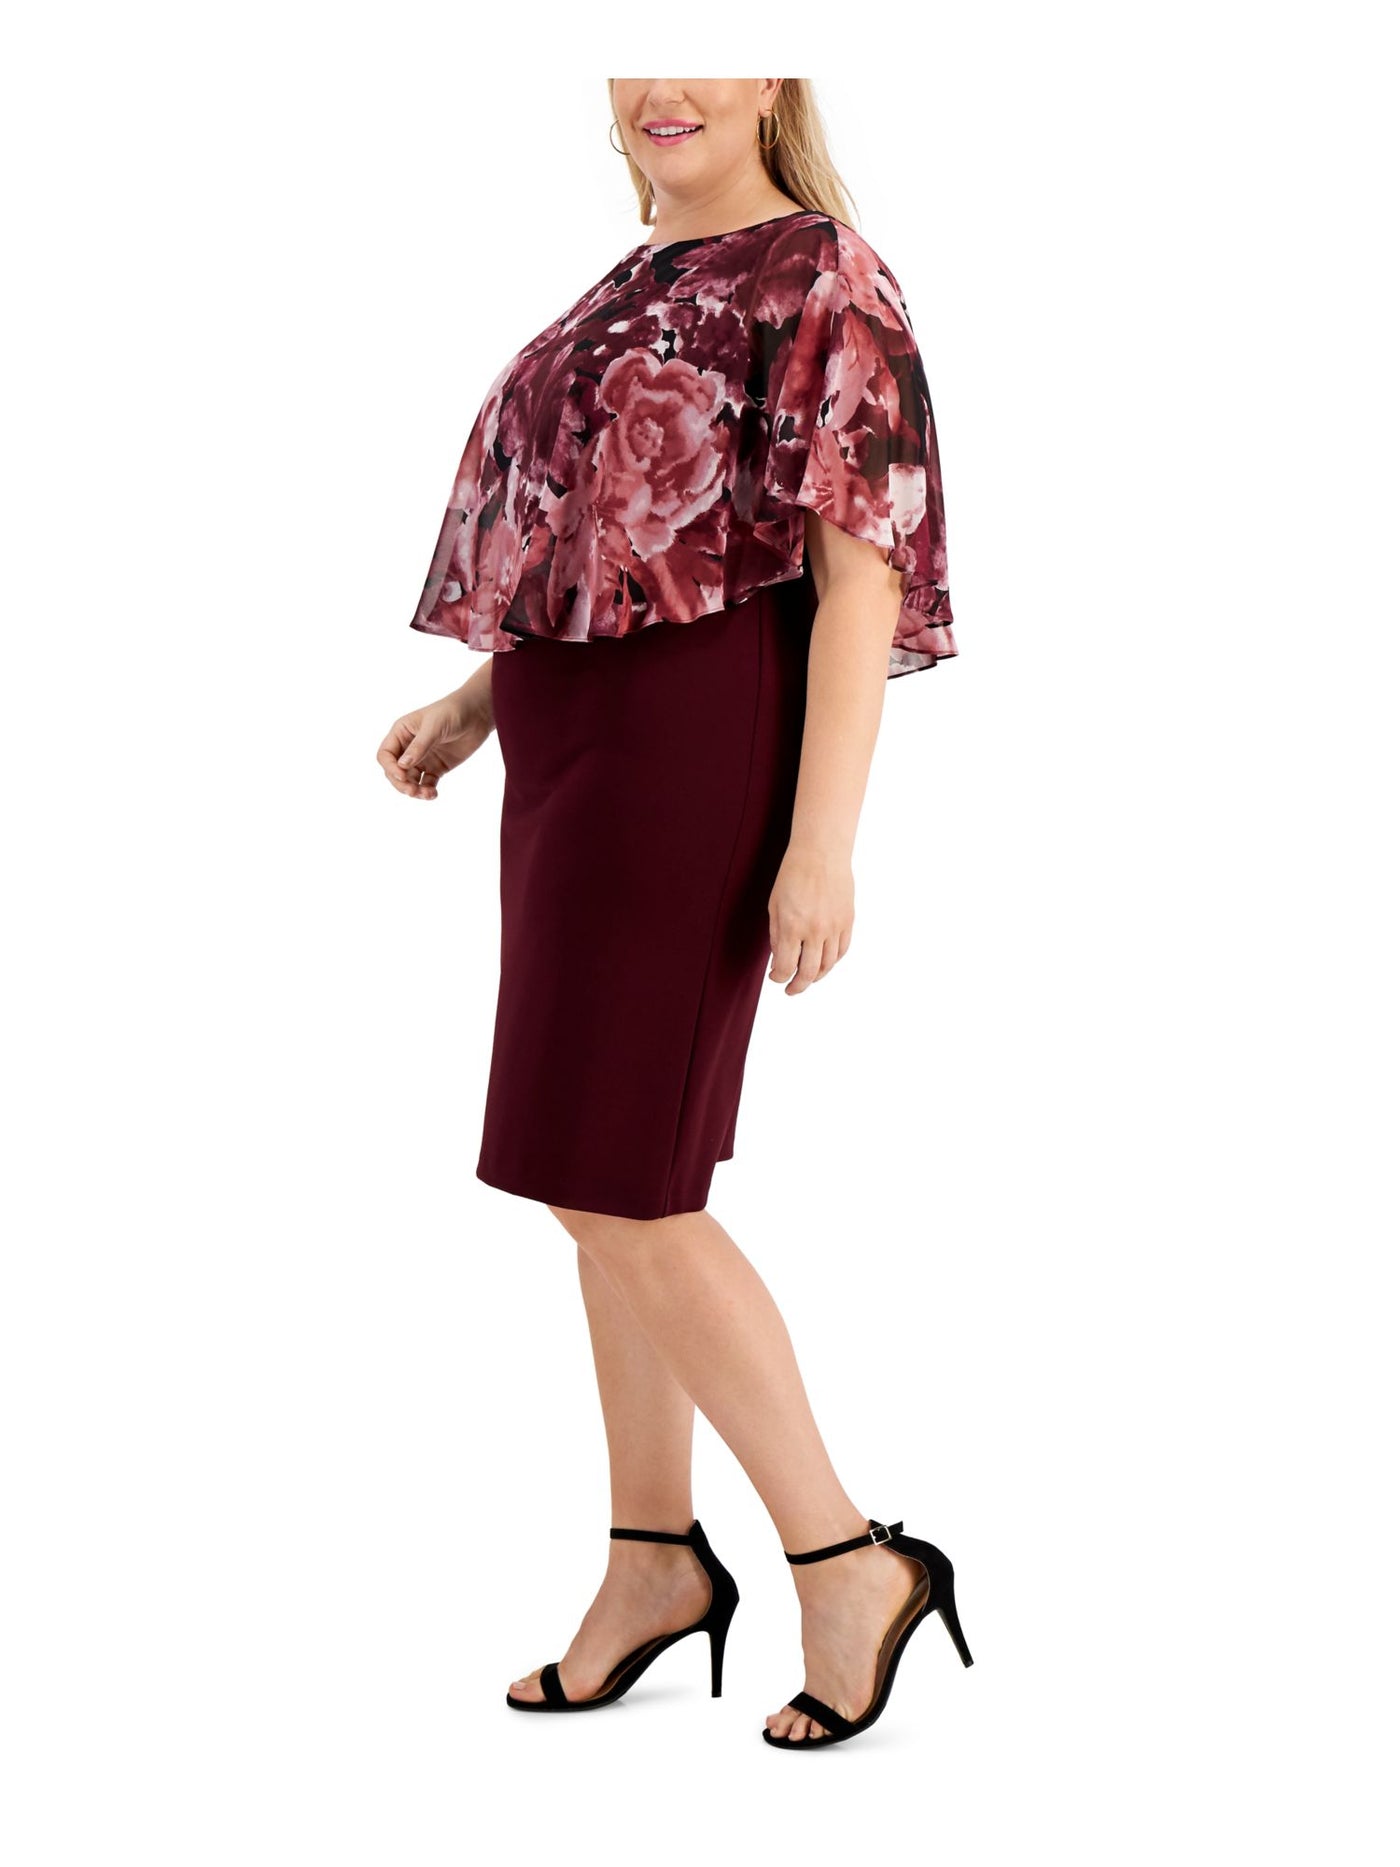 CONNECTED APPAREL Womens Burgundy Stretch Zippered Floral Chiffon Popover Sleeveless Round Neck Knee Length Wear To Work Shift Dress Plus 24W